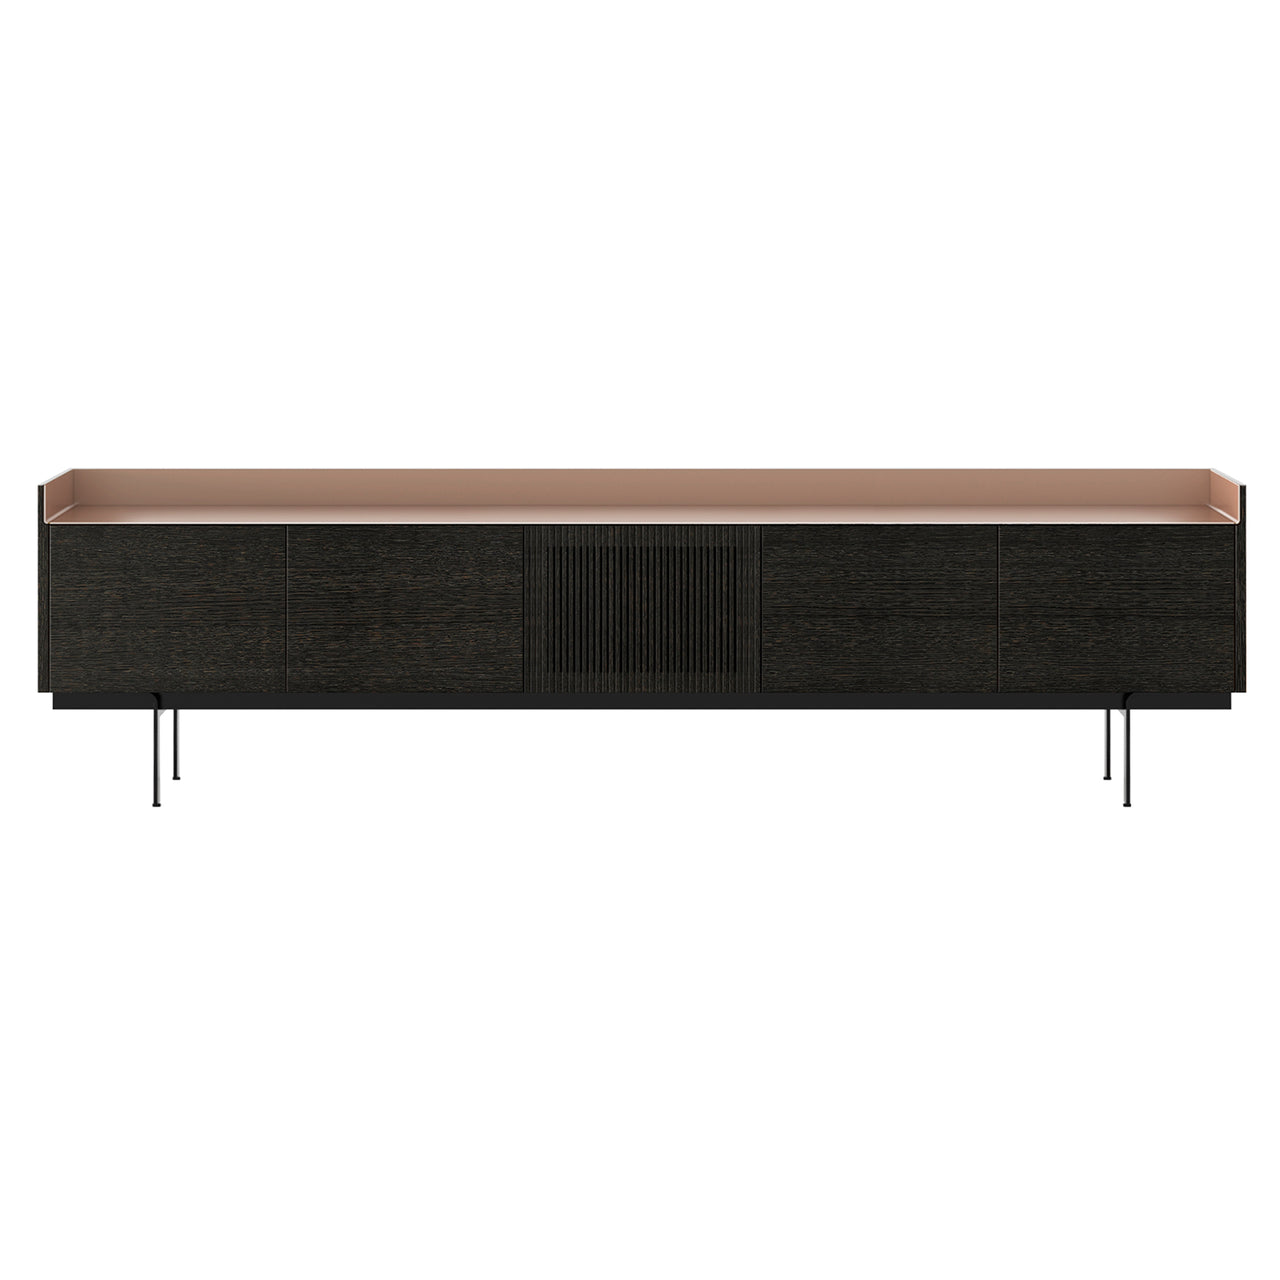 Stockholm Technic Sideboard: STH506 + Dark Grey Stained Oak + Anodized Aluminum Pale Rose + Black